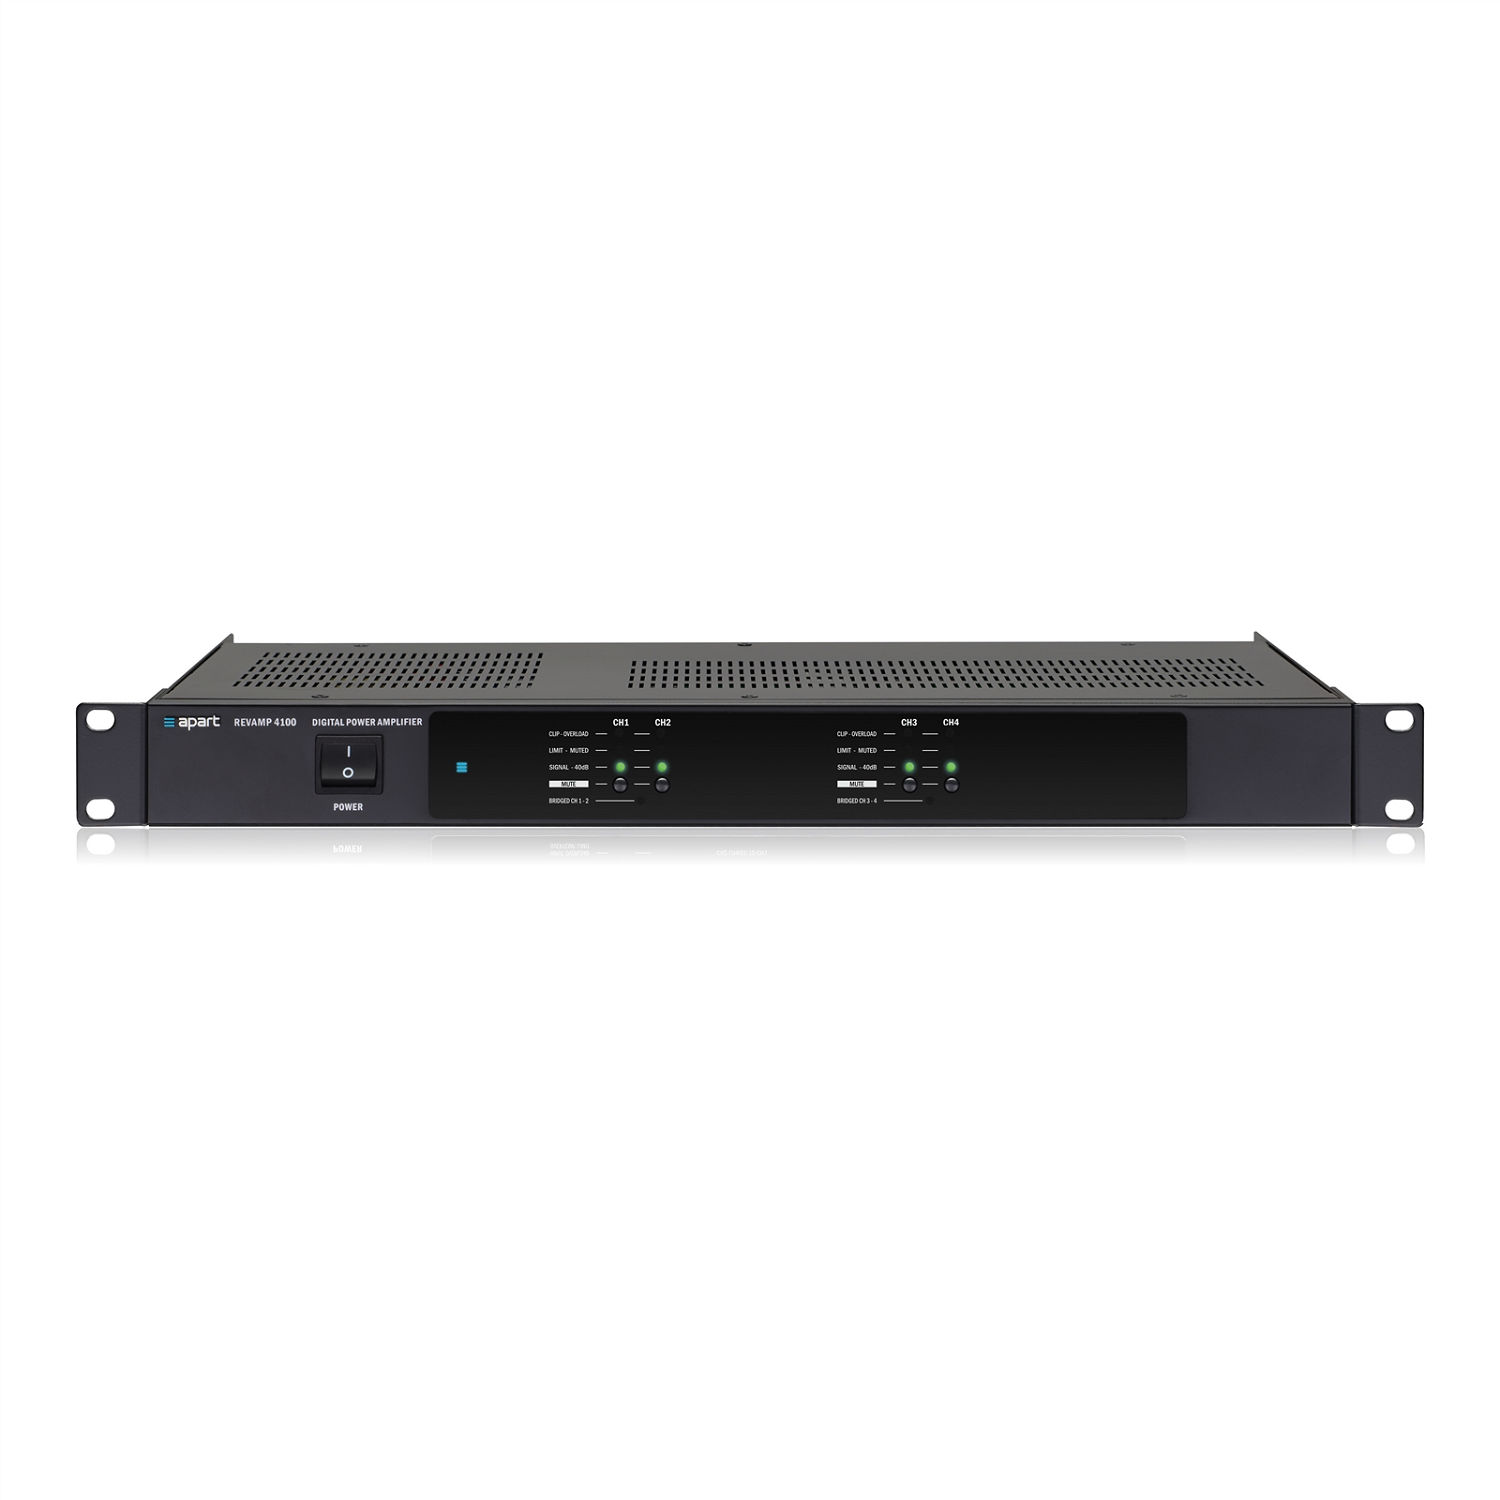 4 Channel class D amplifier 4 x 100 Watts (RMS @ 4 Ohms), 4 x 110 Watts (Dynamic @ 4 Ohms) or in Bridge Mode 1 x 200 Watts (RMS @ 8 Ohms), Convection Cooled, 1 U, 19&quot; Rackmount , REVAMP4100 , APART